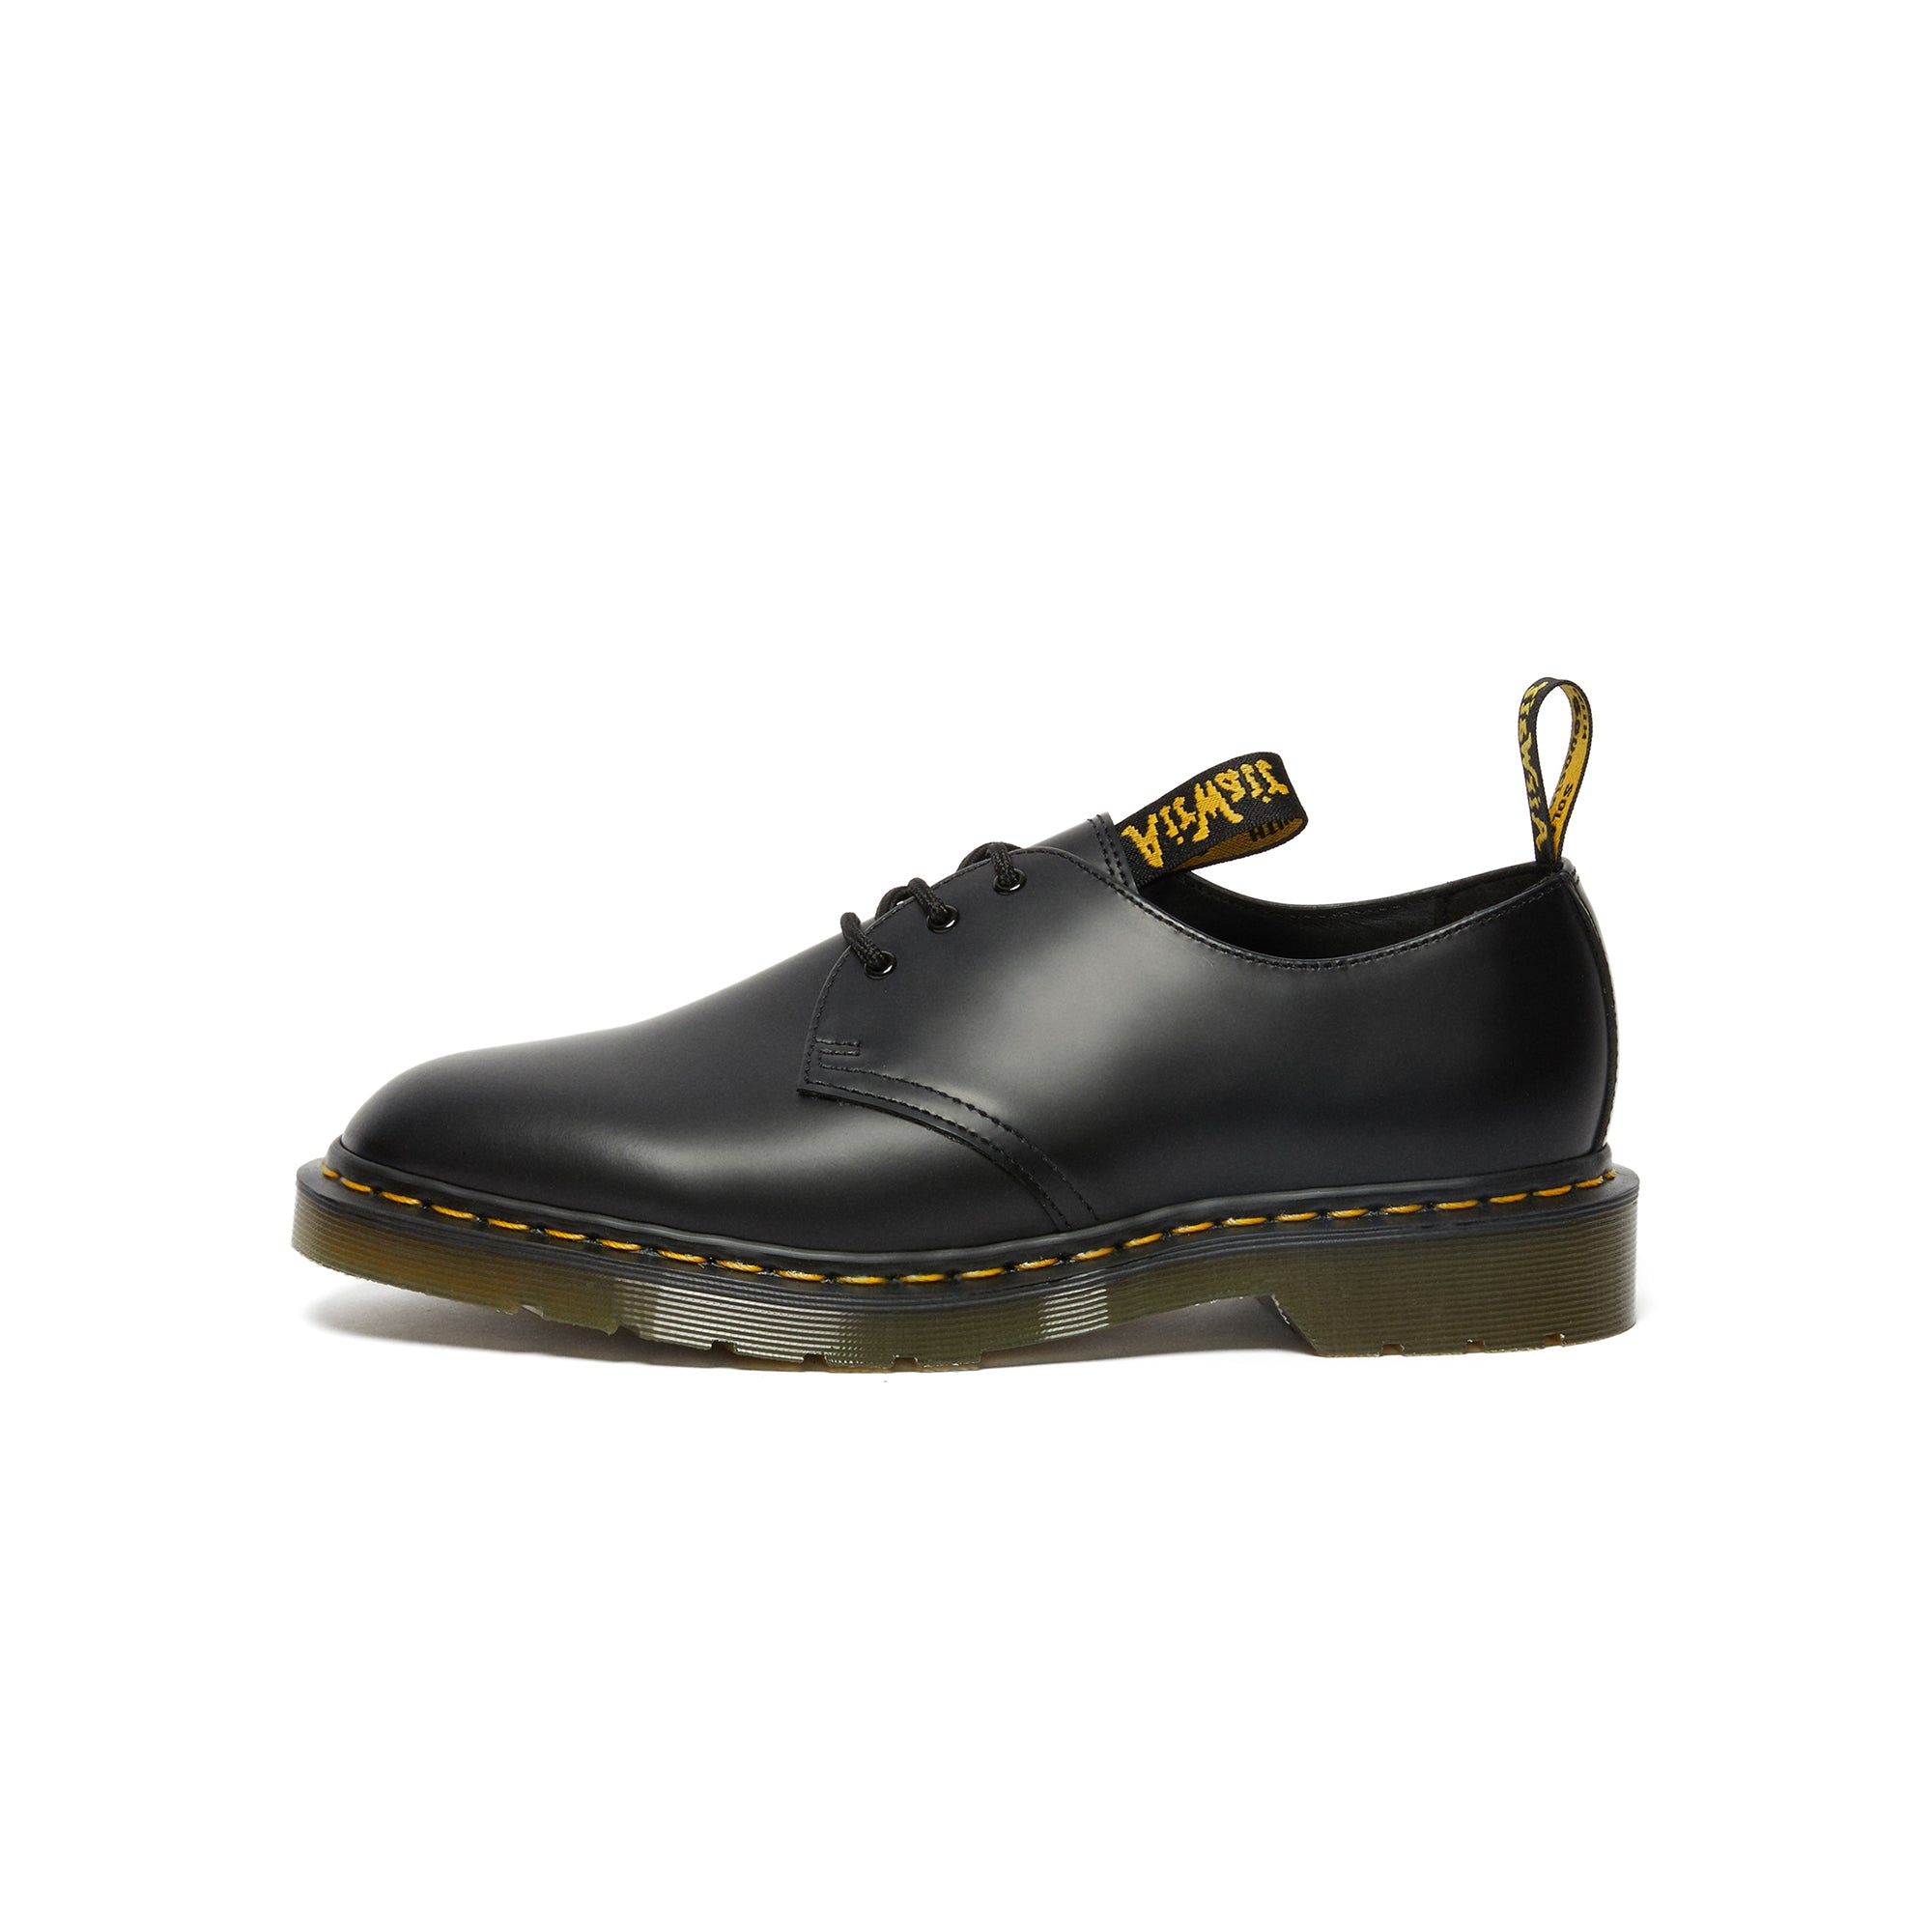 Dr. Martens x Engineered Garments 1461 Smooth Leather Oxford Shoes